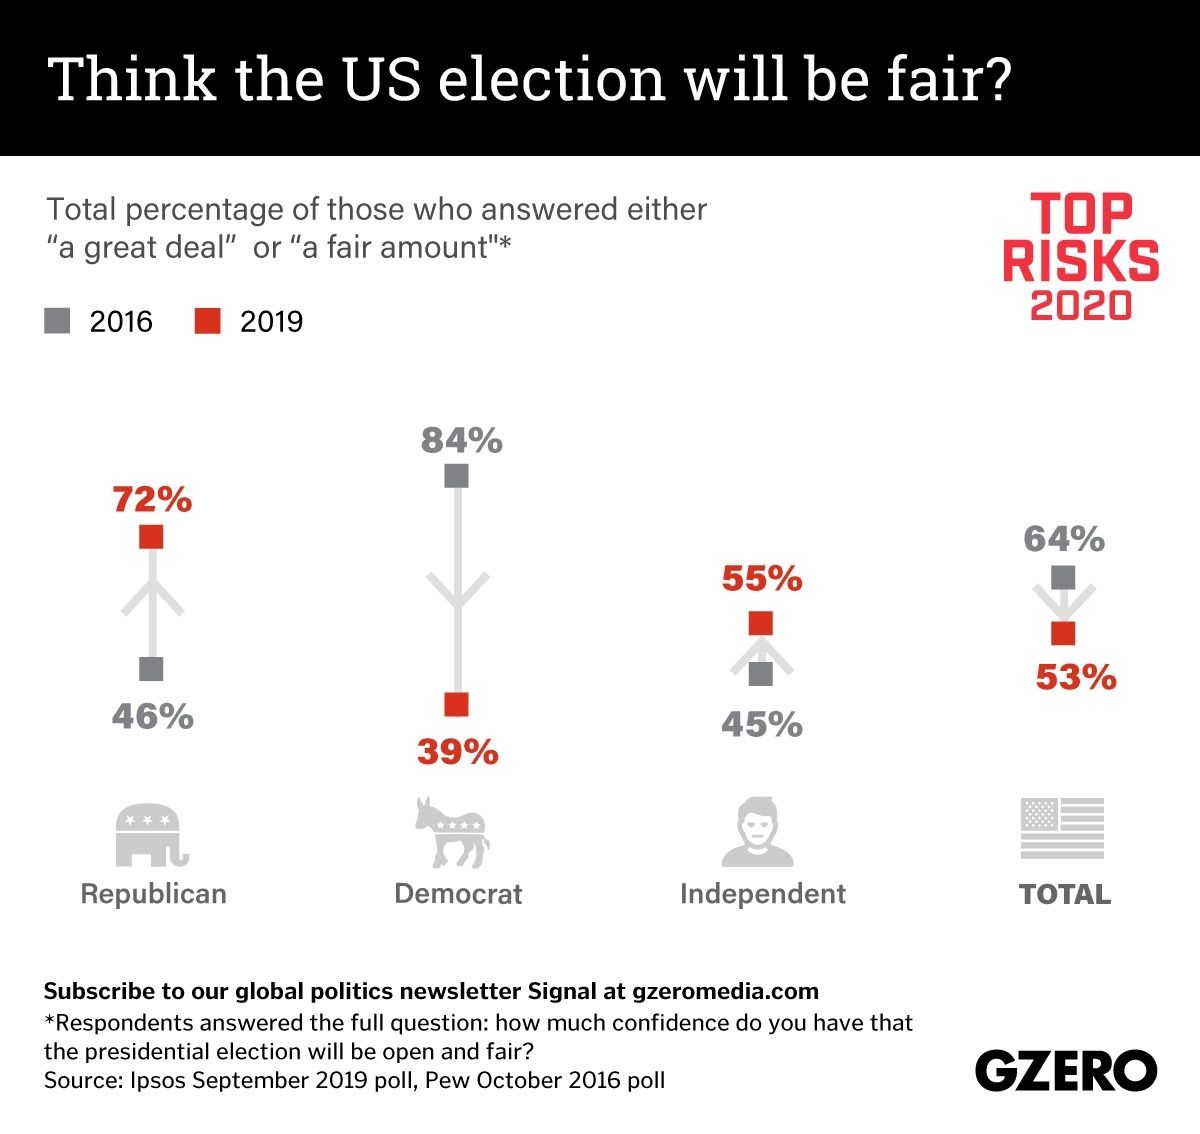 The Graphic Truth: Think the US election will be fair?